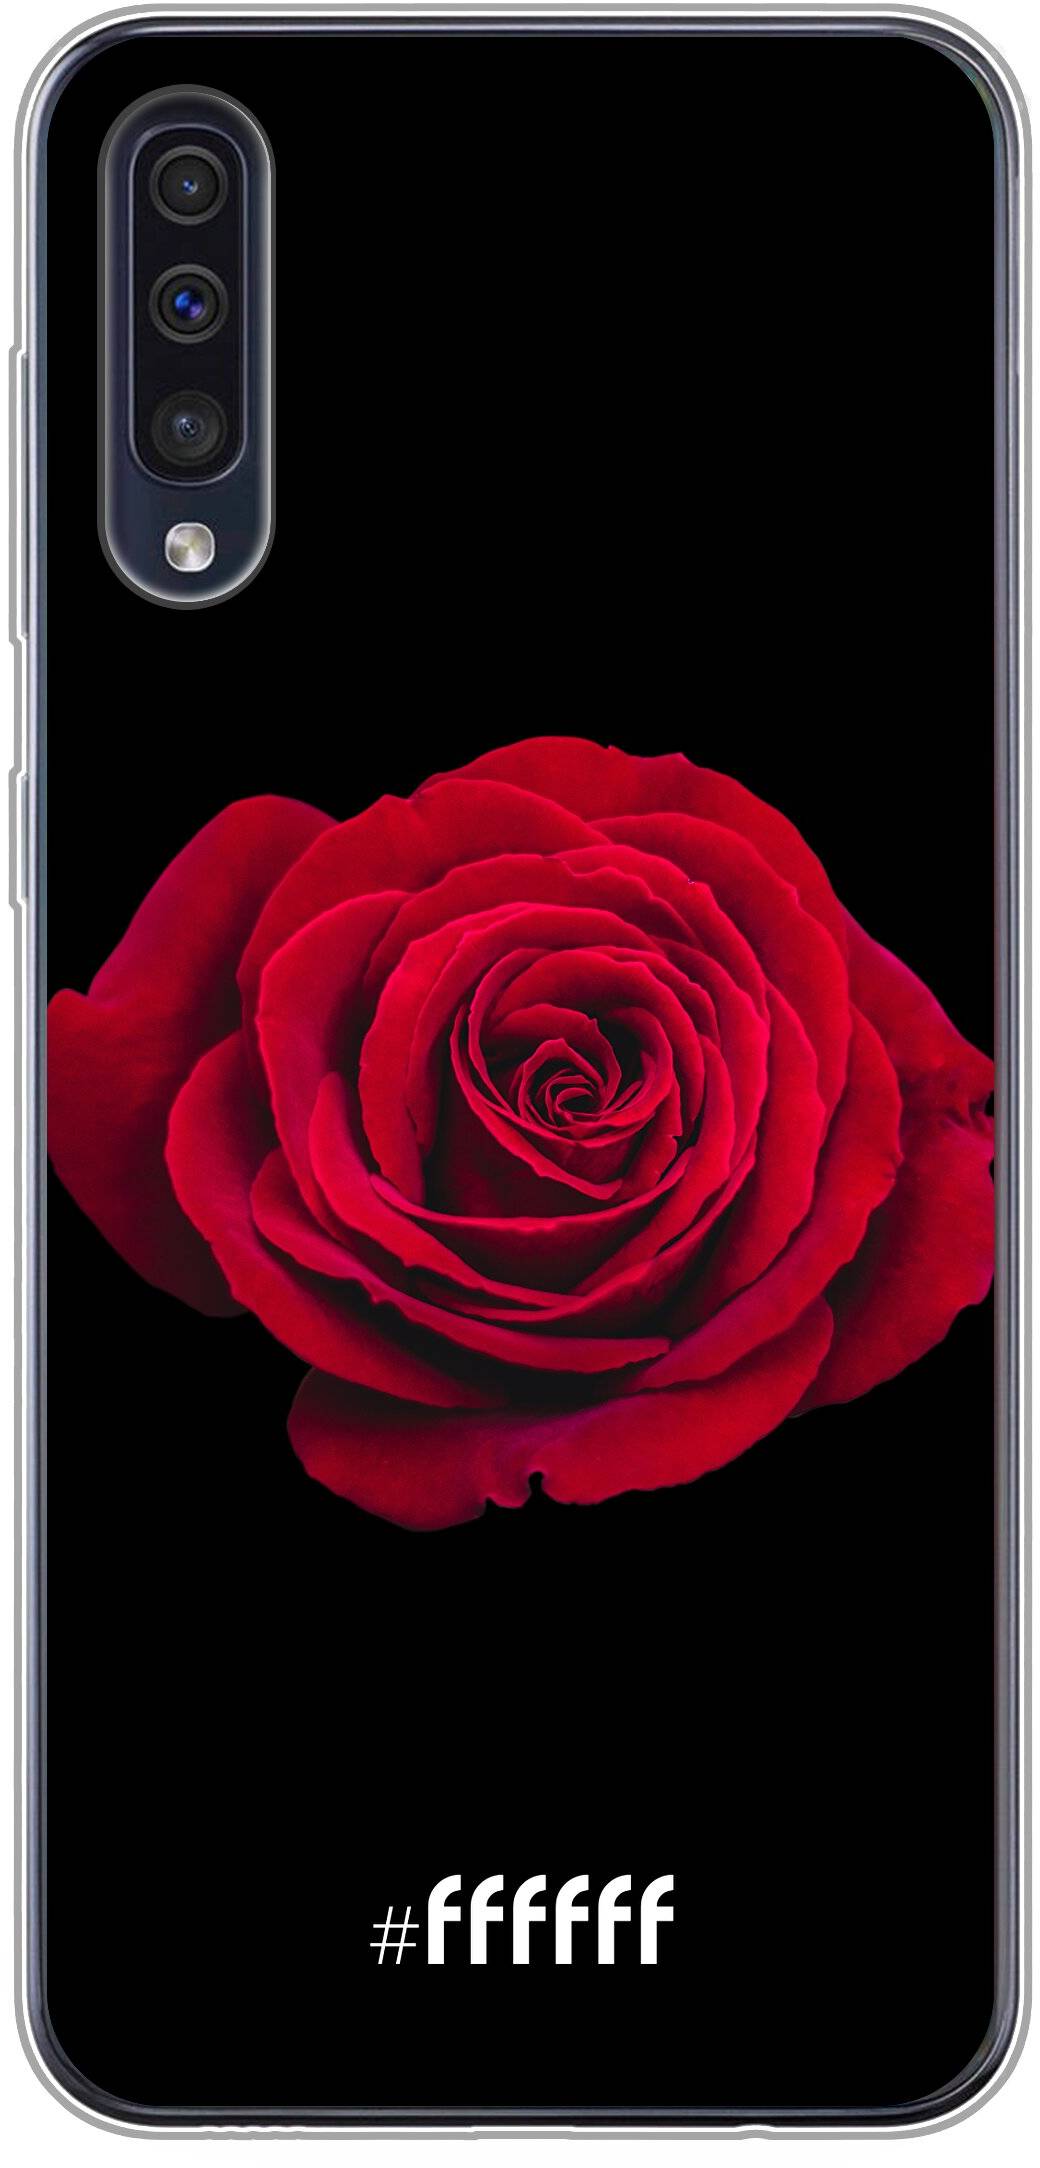 Radiant Rose Galaxy A30s